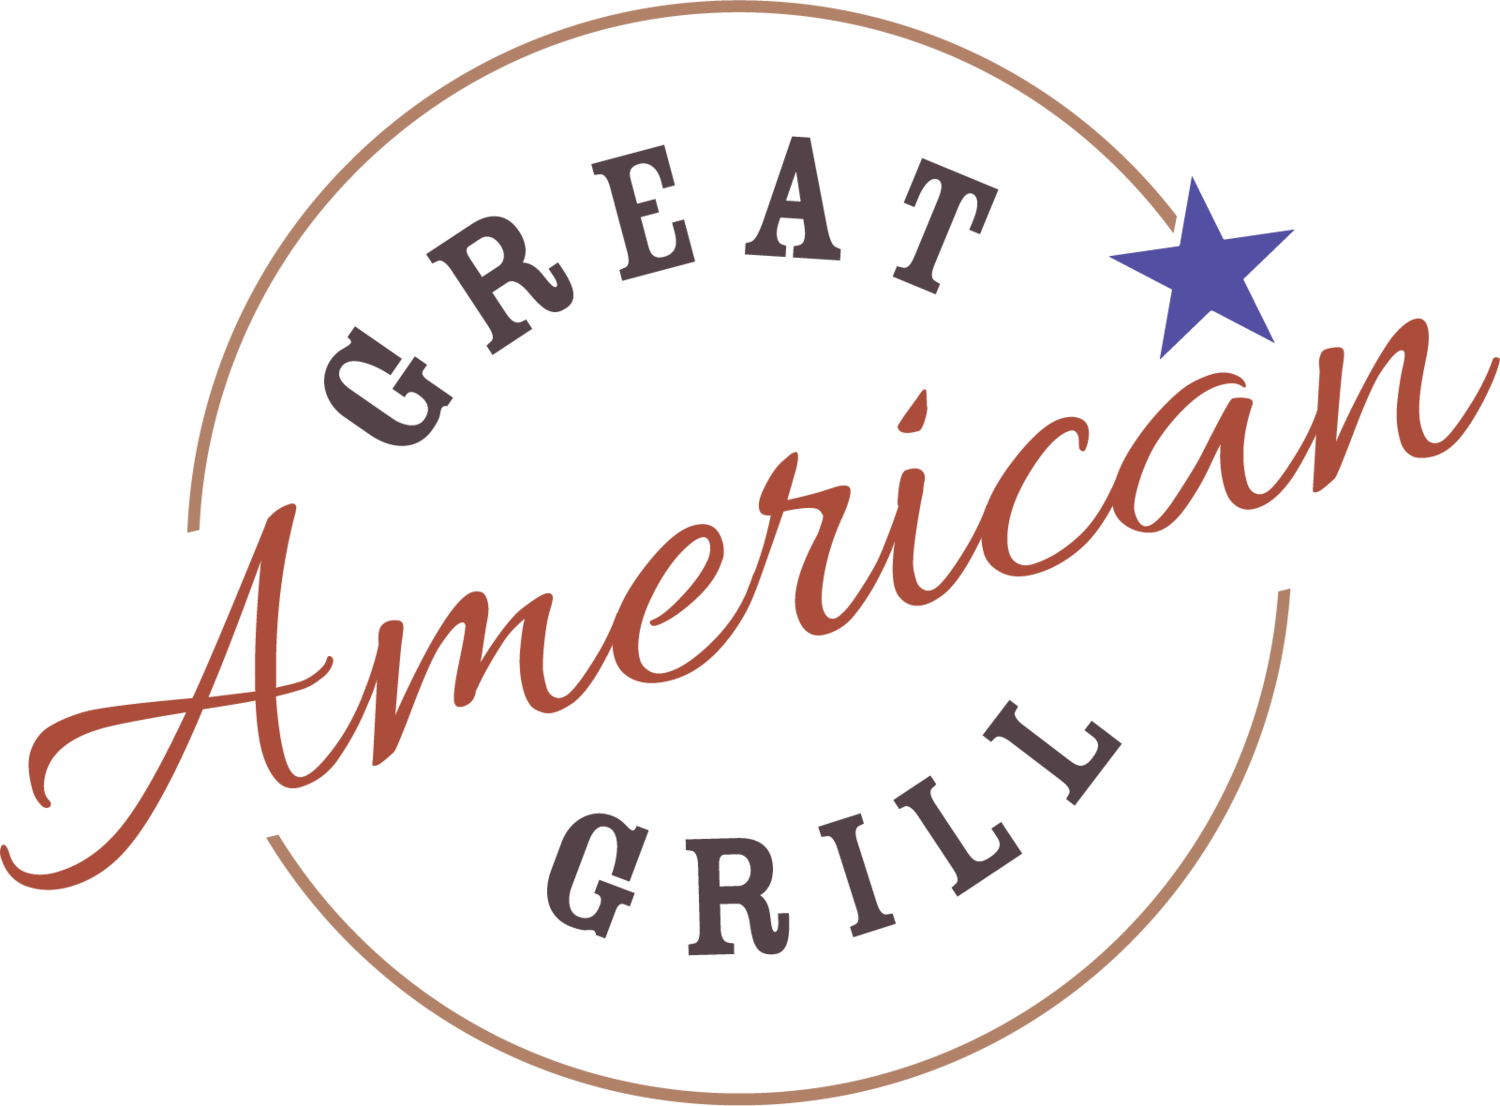 Great American Grill